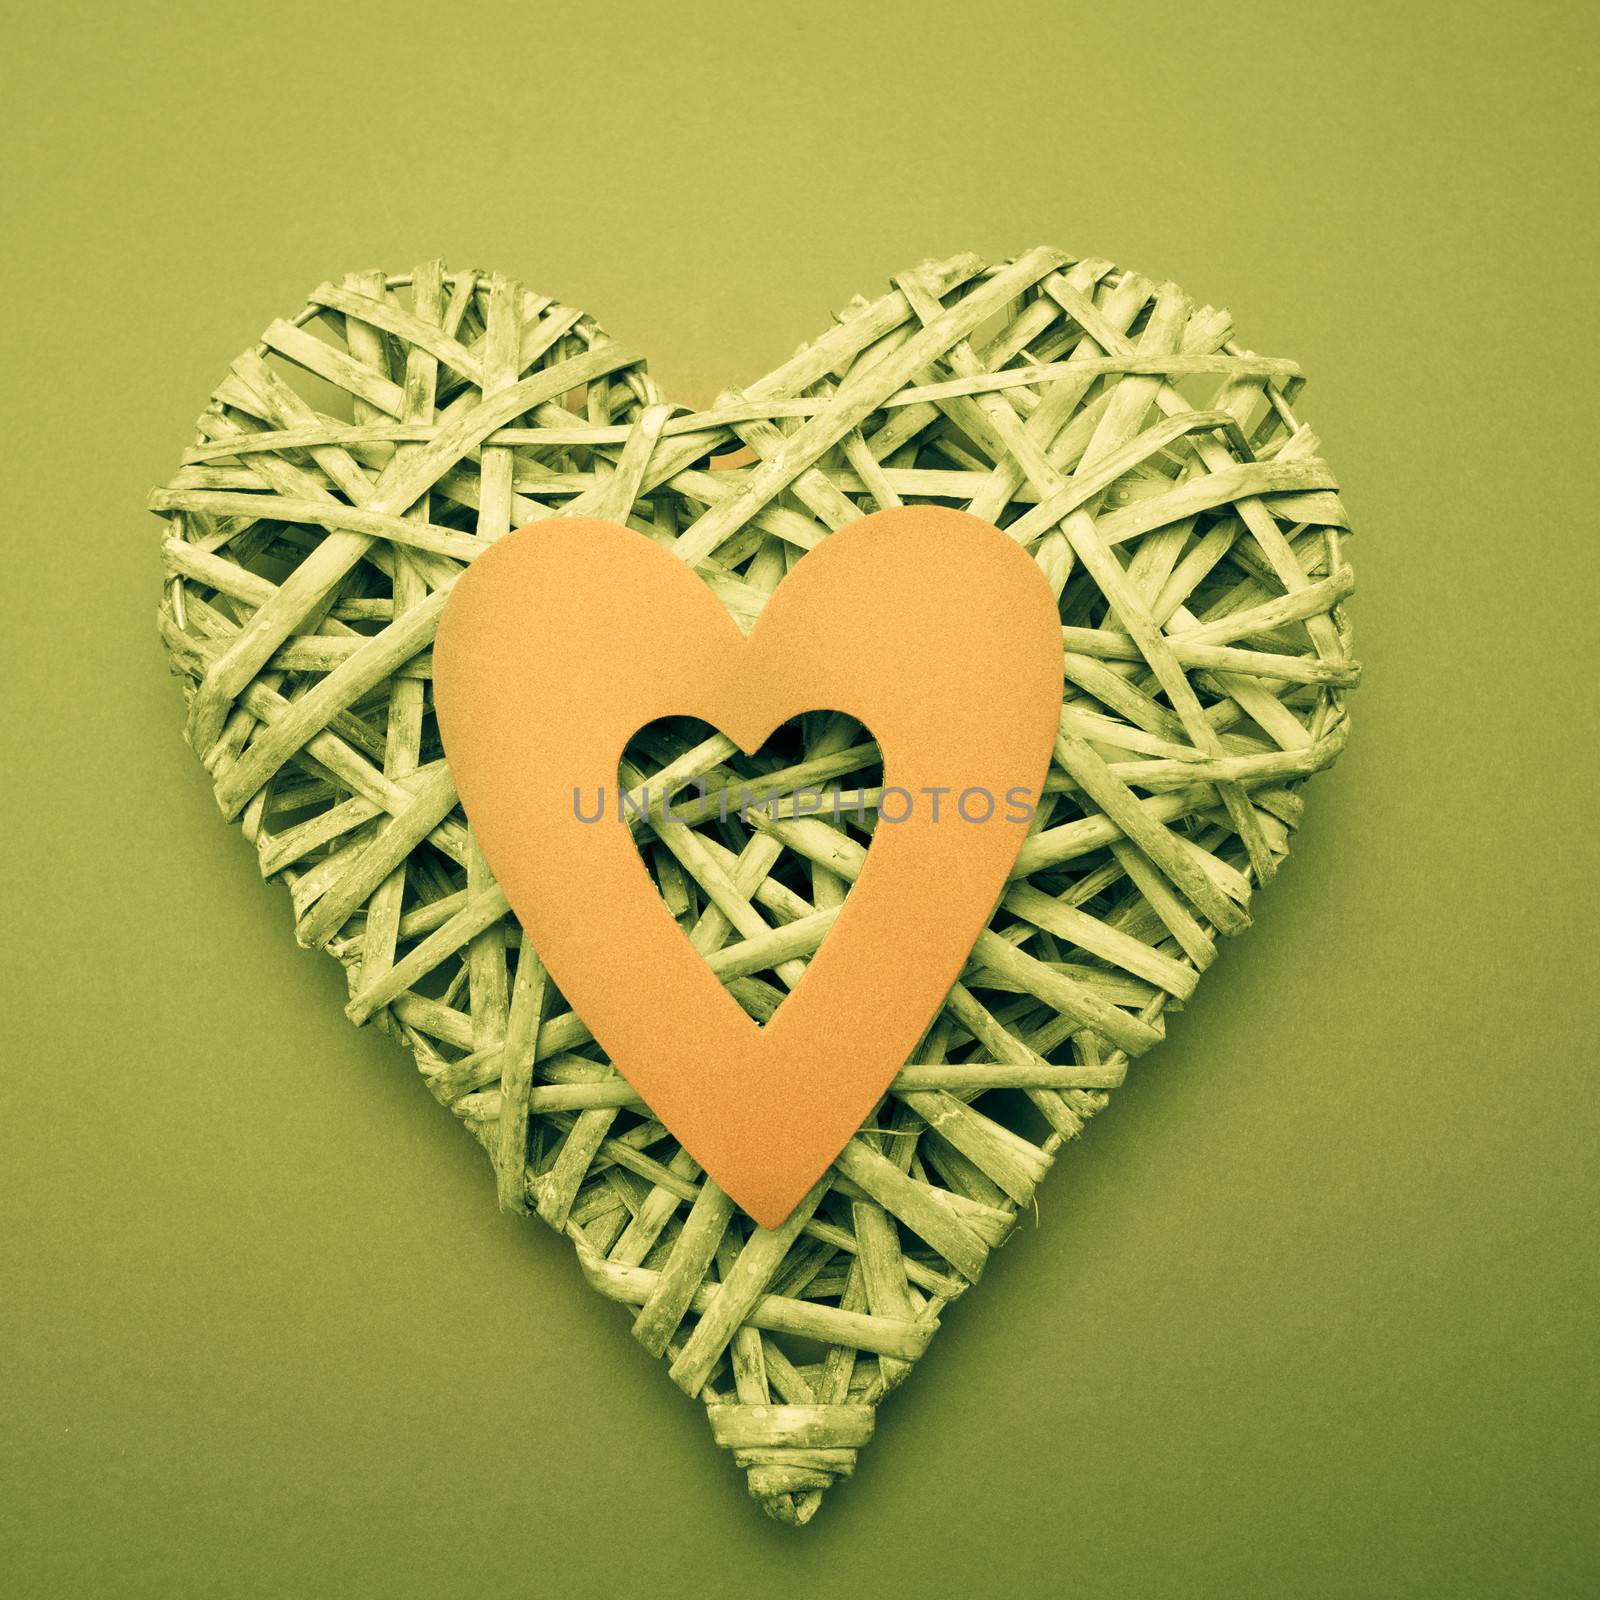 Wicker heart ornament with yellow paper cut out by Wavebreakmedia